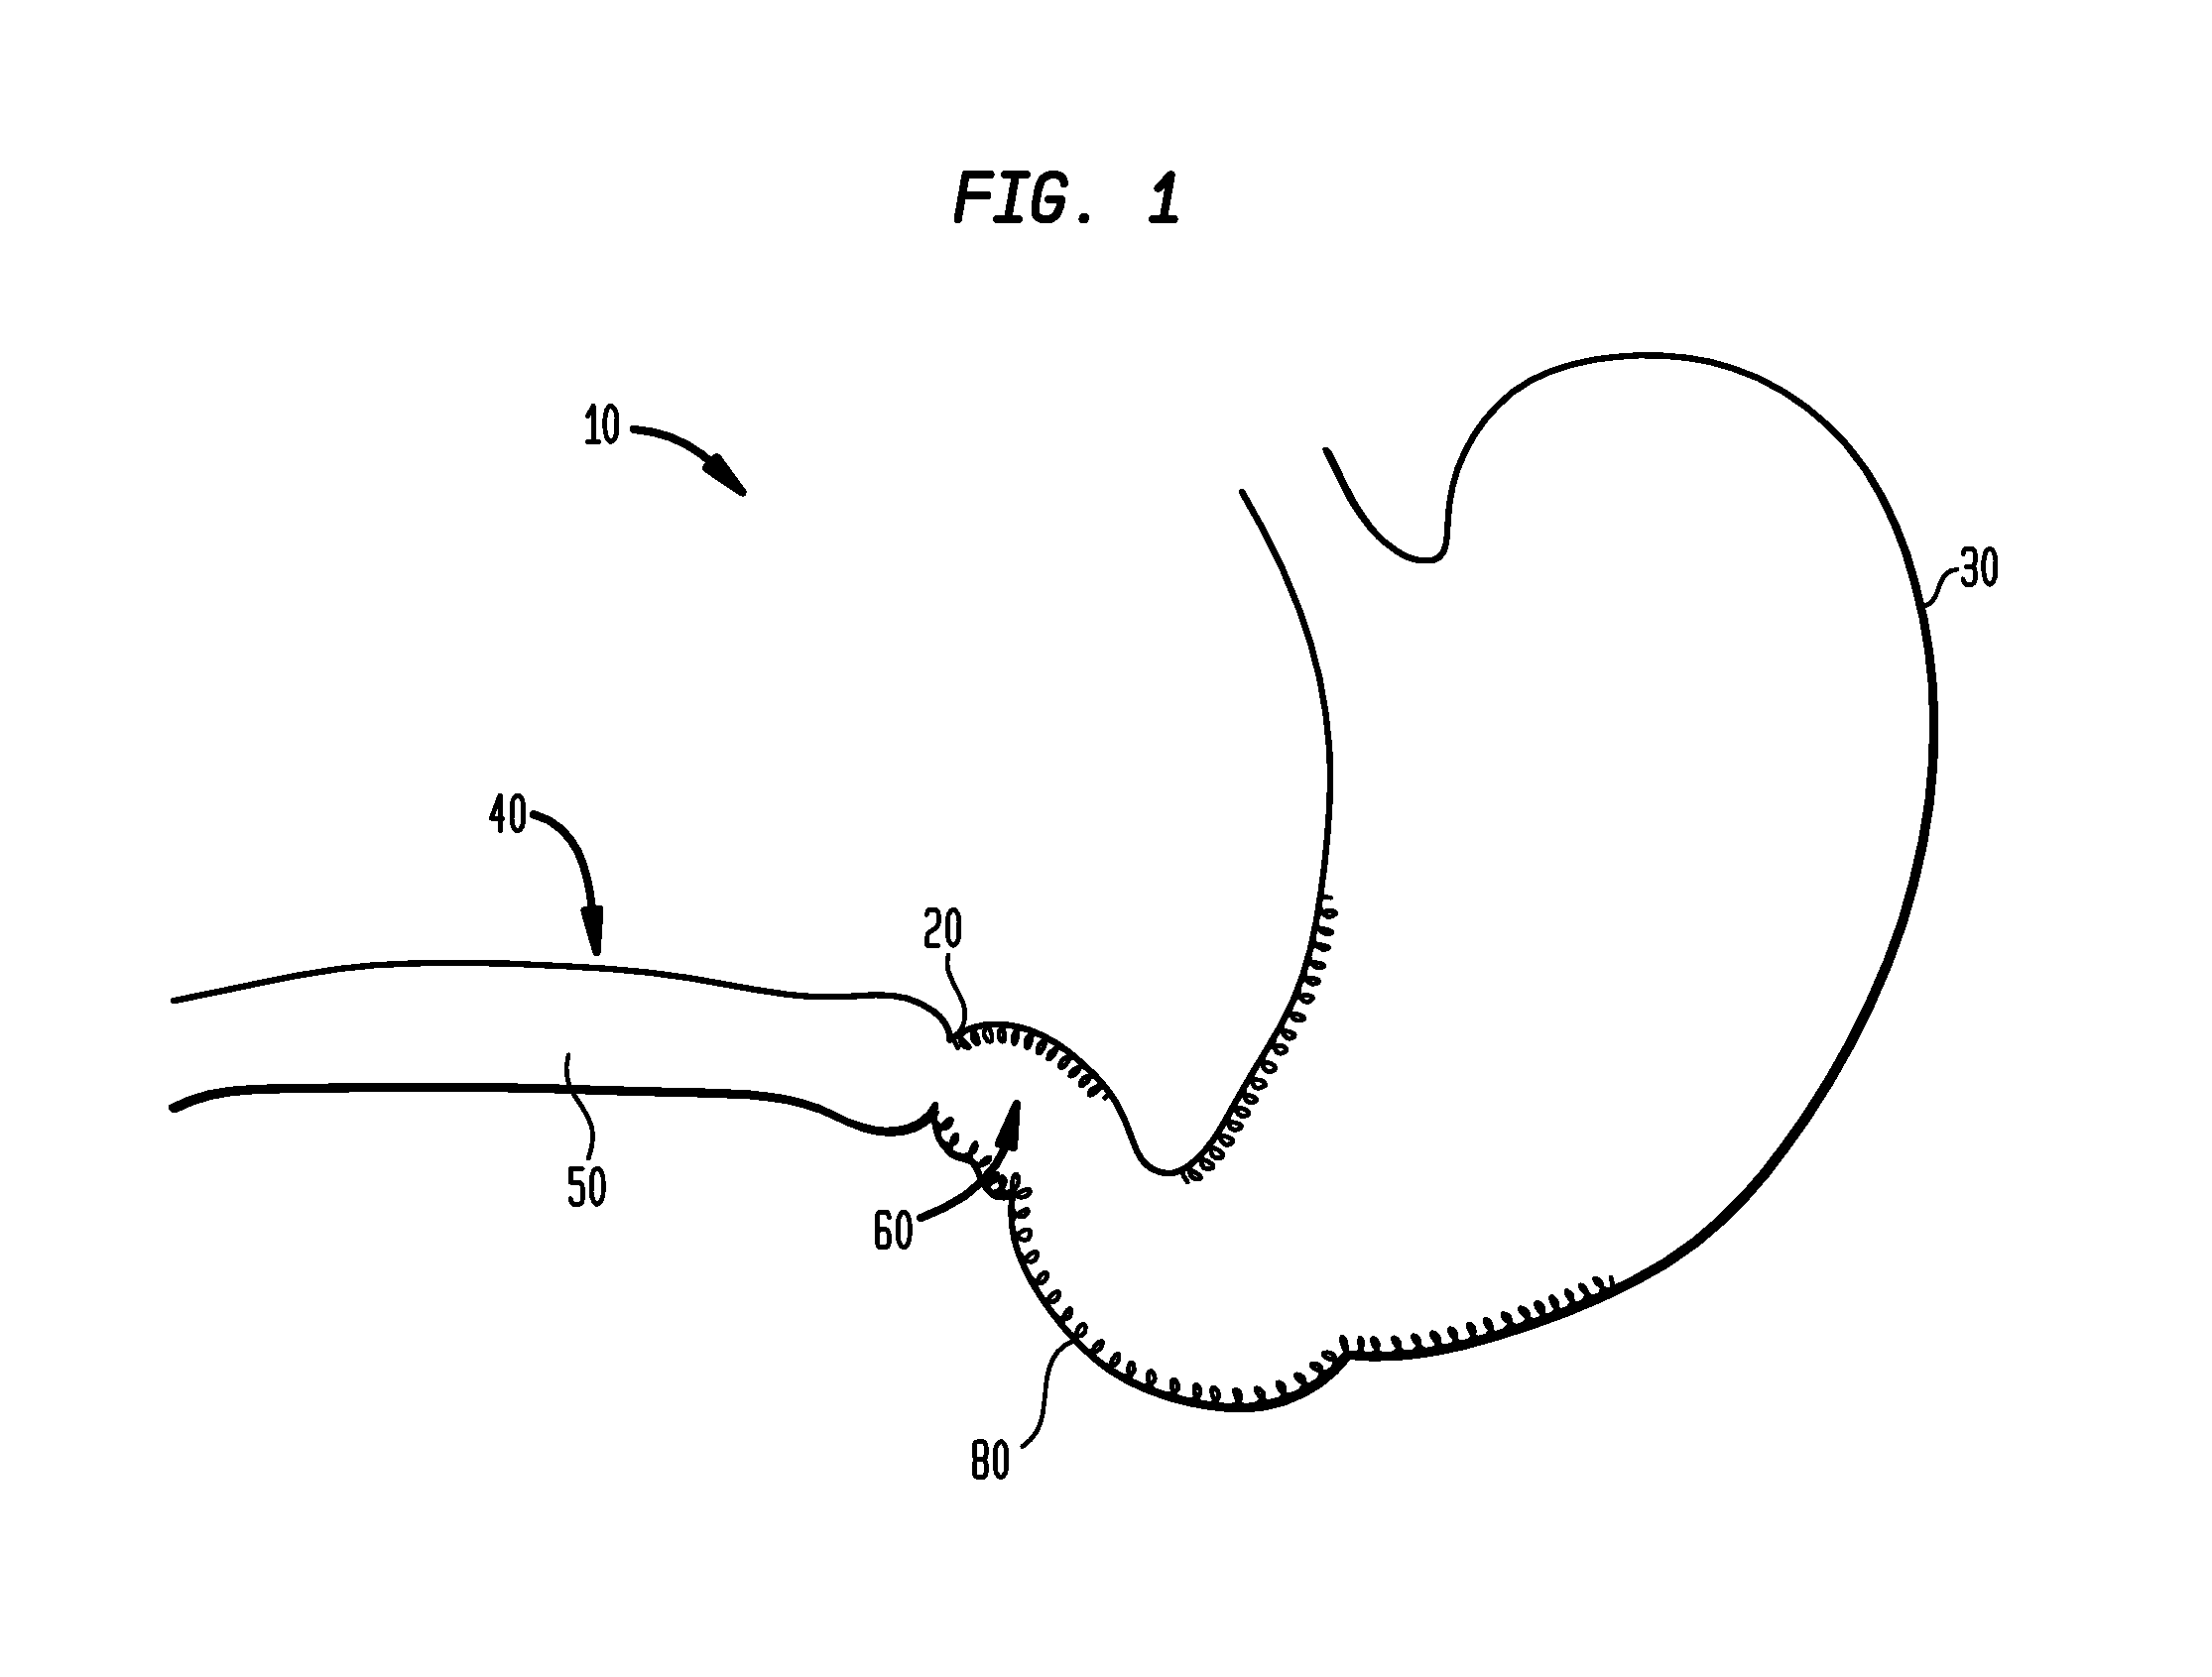 Systems and methods for treatment of obesity and type 2 diabetes